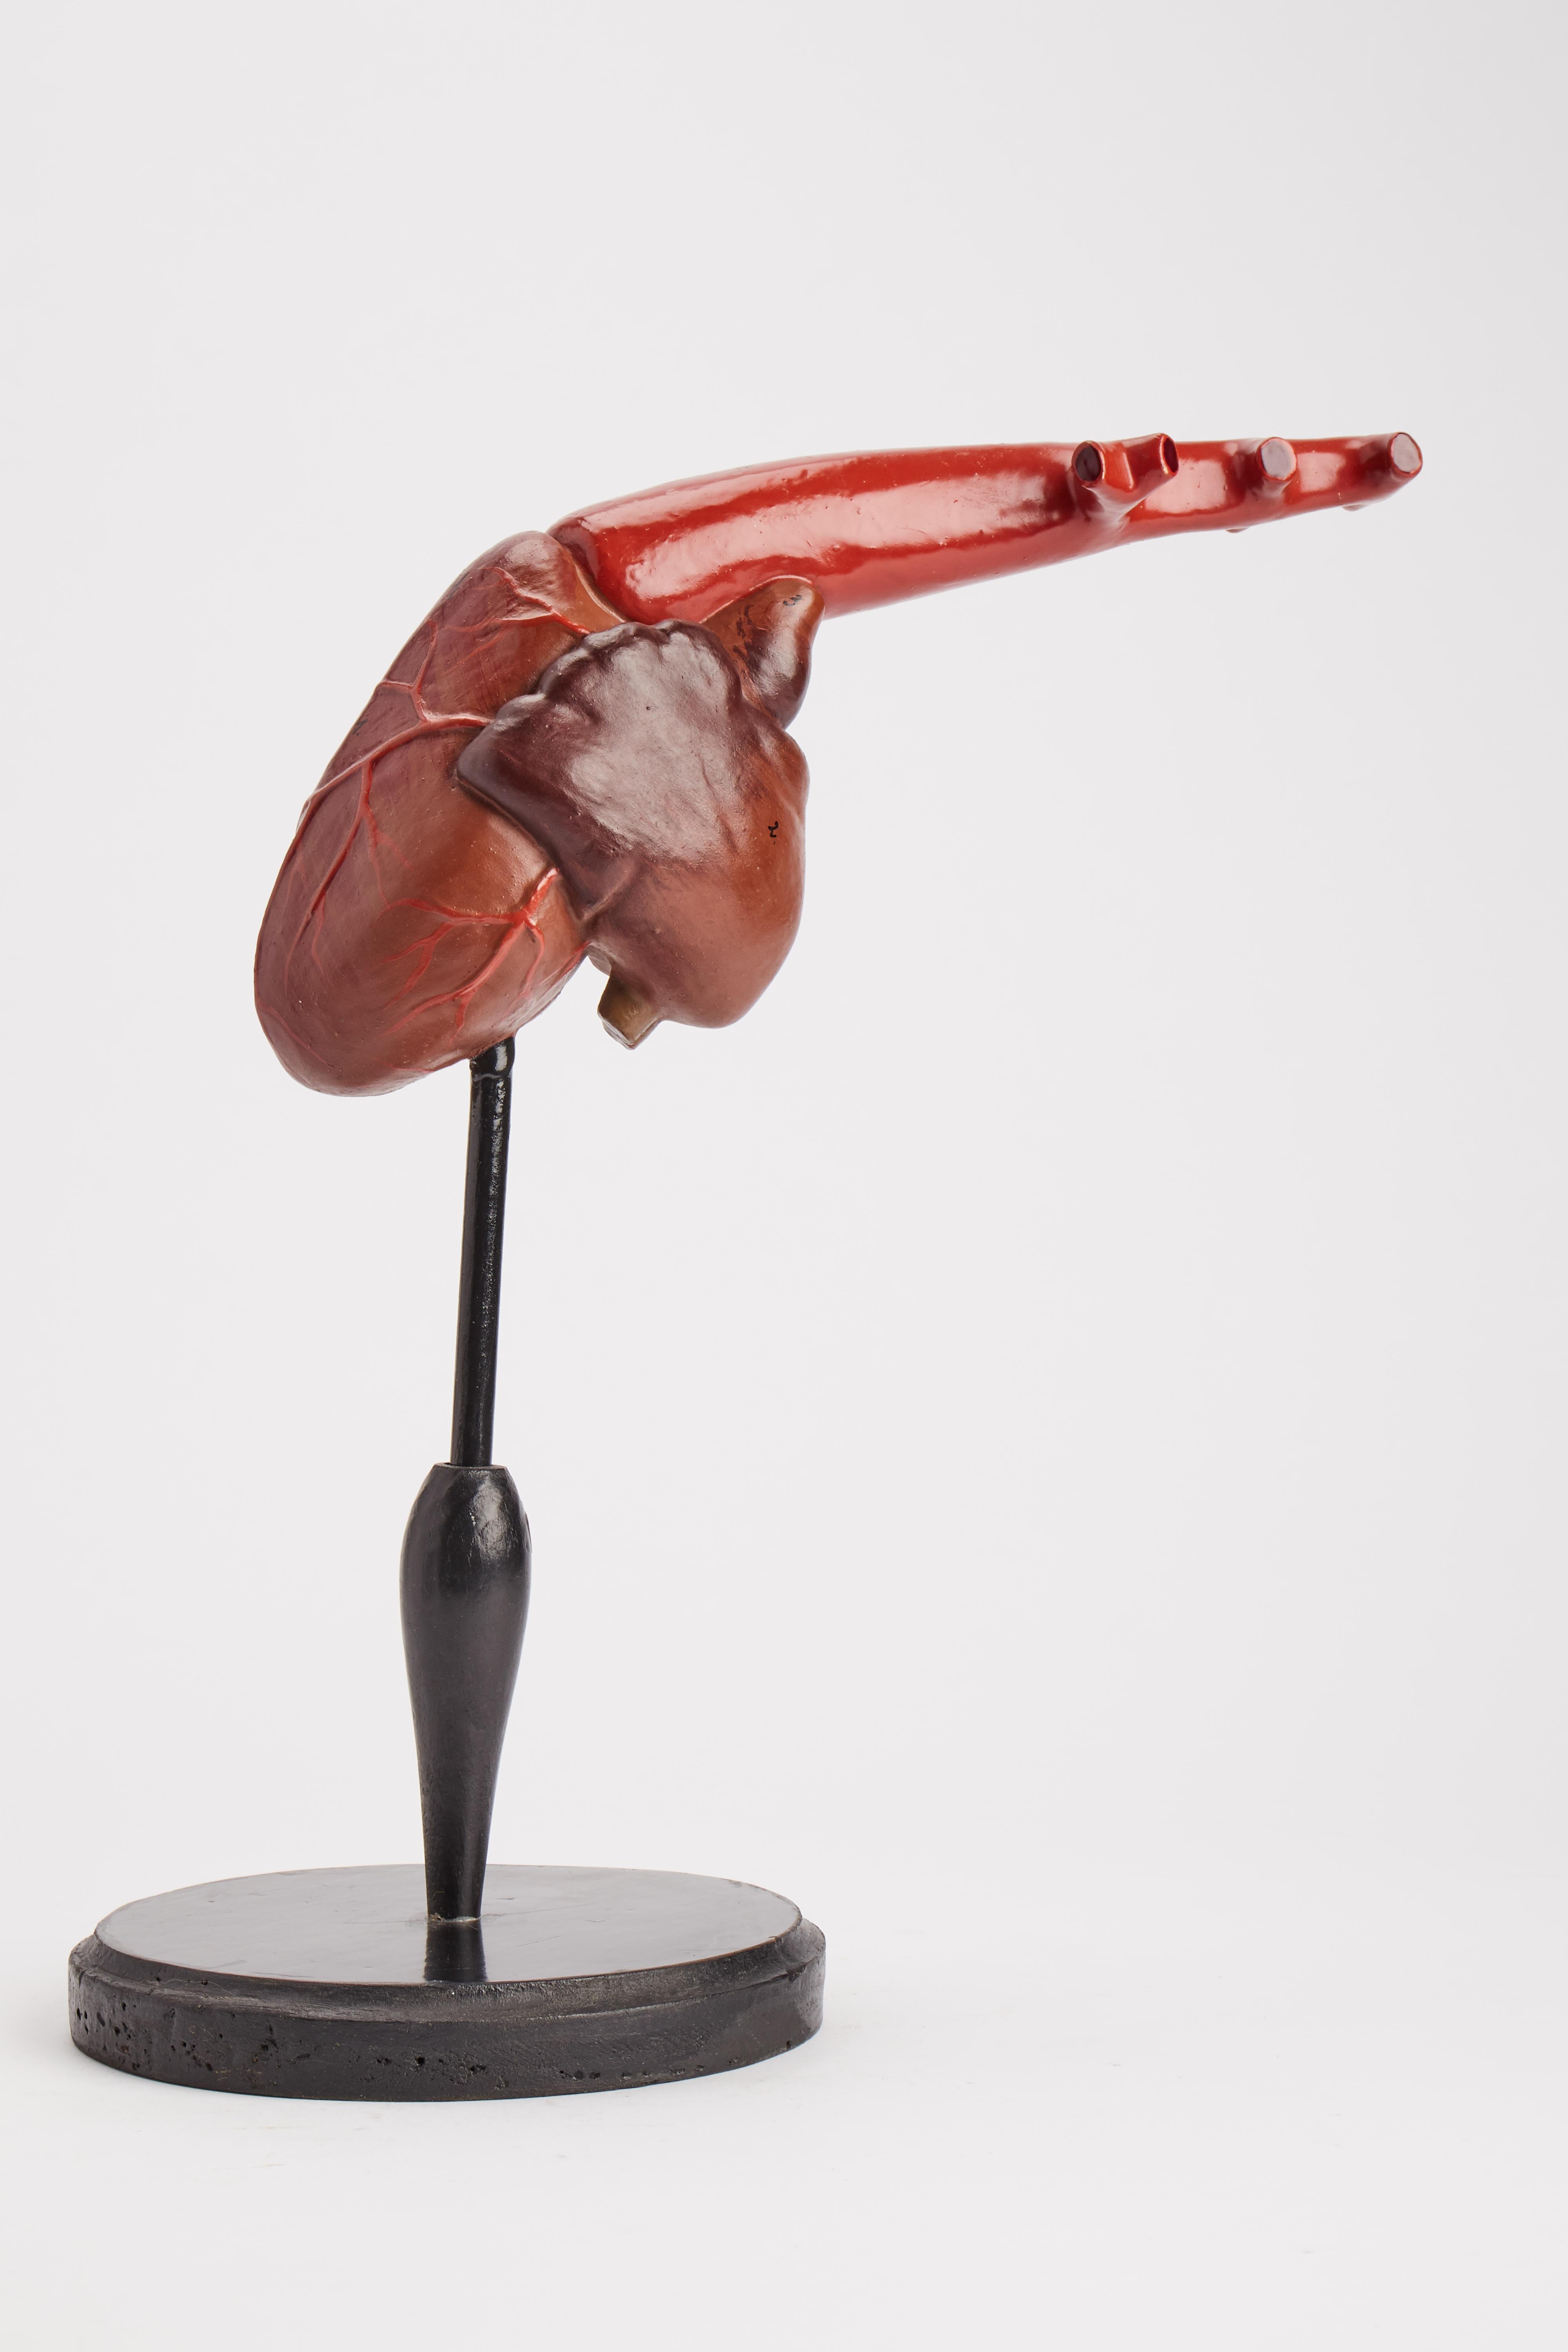 French Anatomic Model for Class: an Animal’s Heart, France, 1890